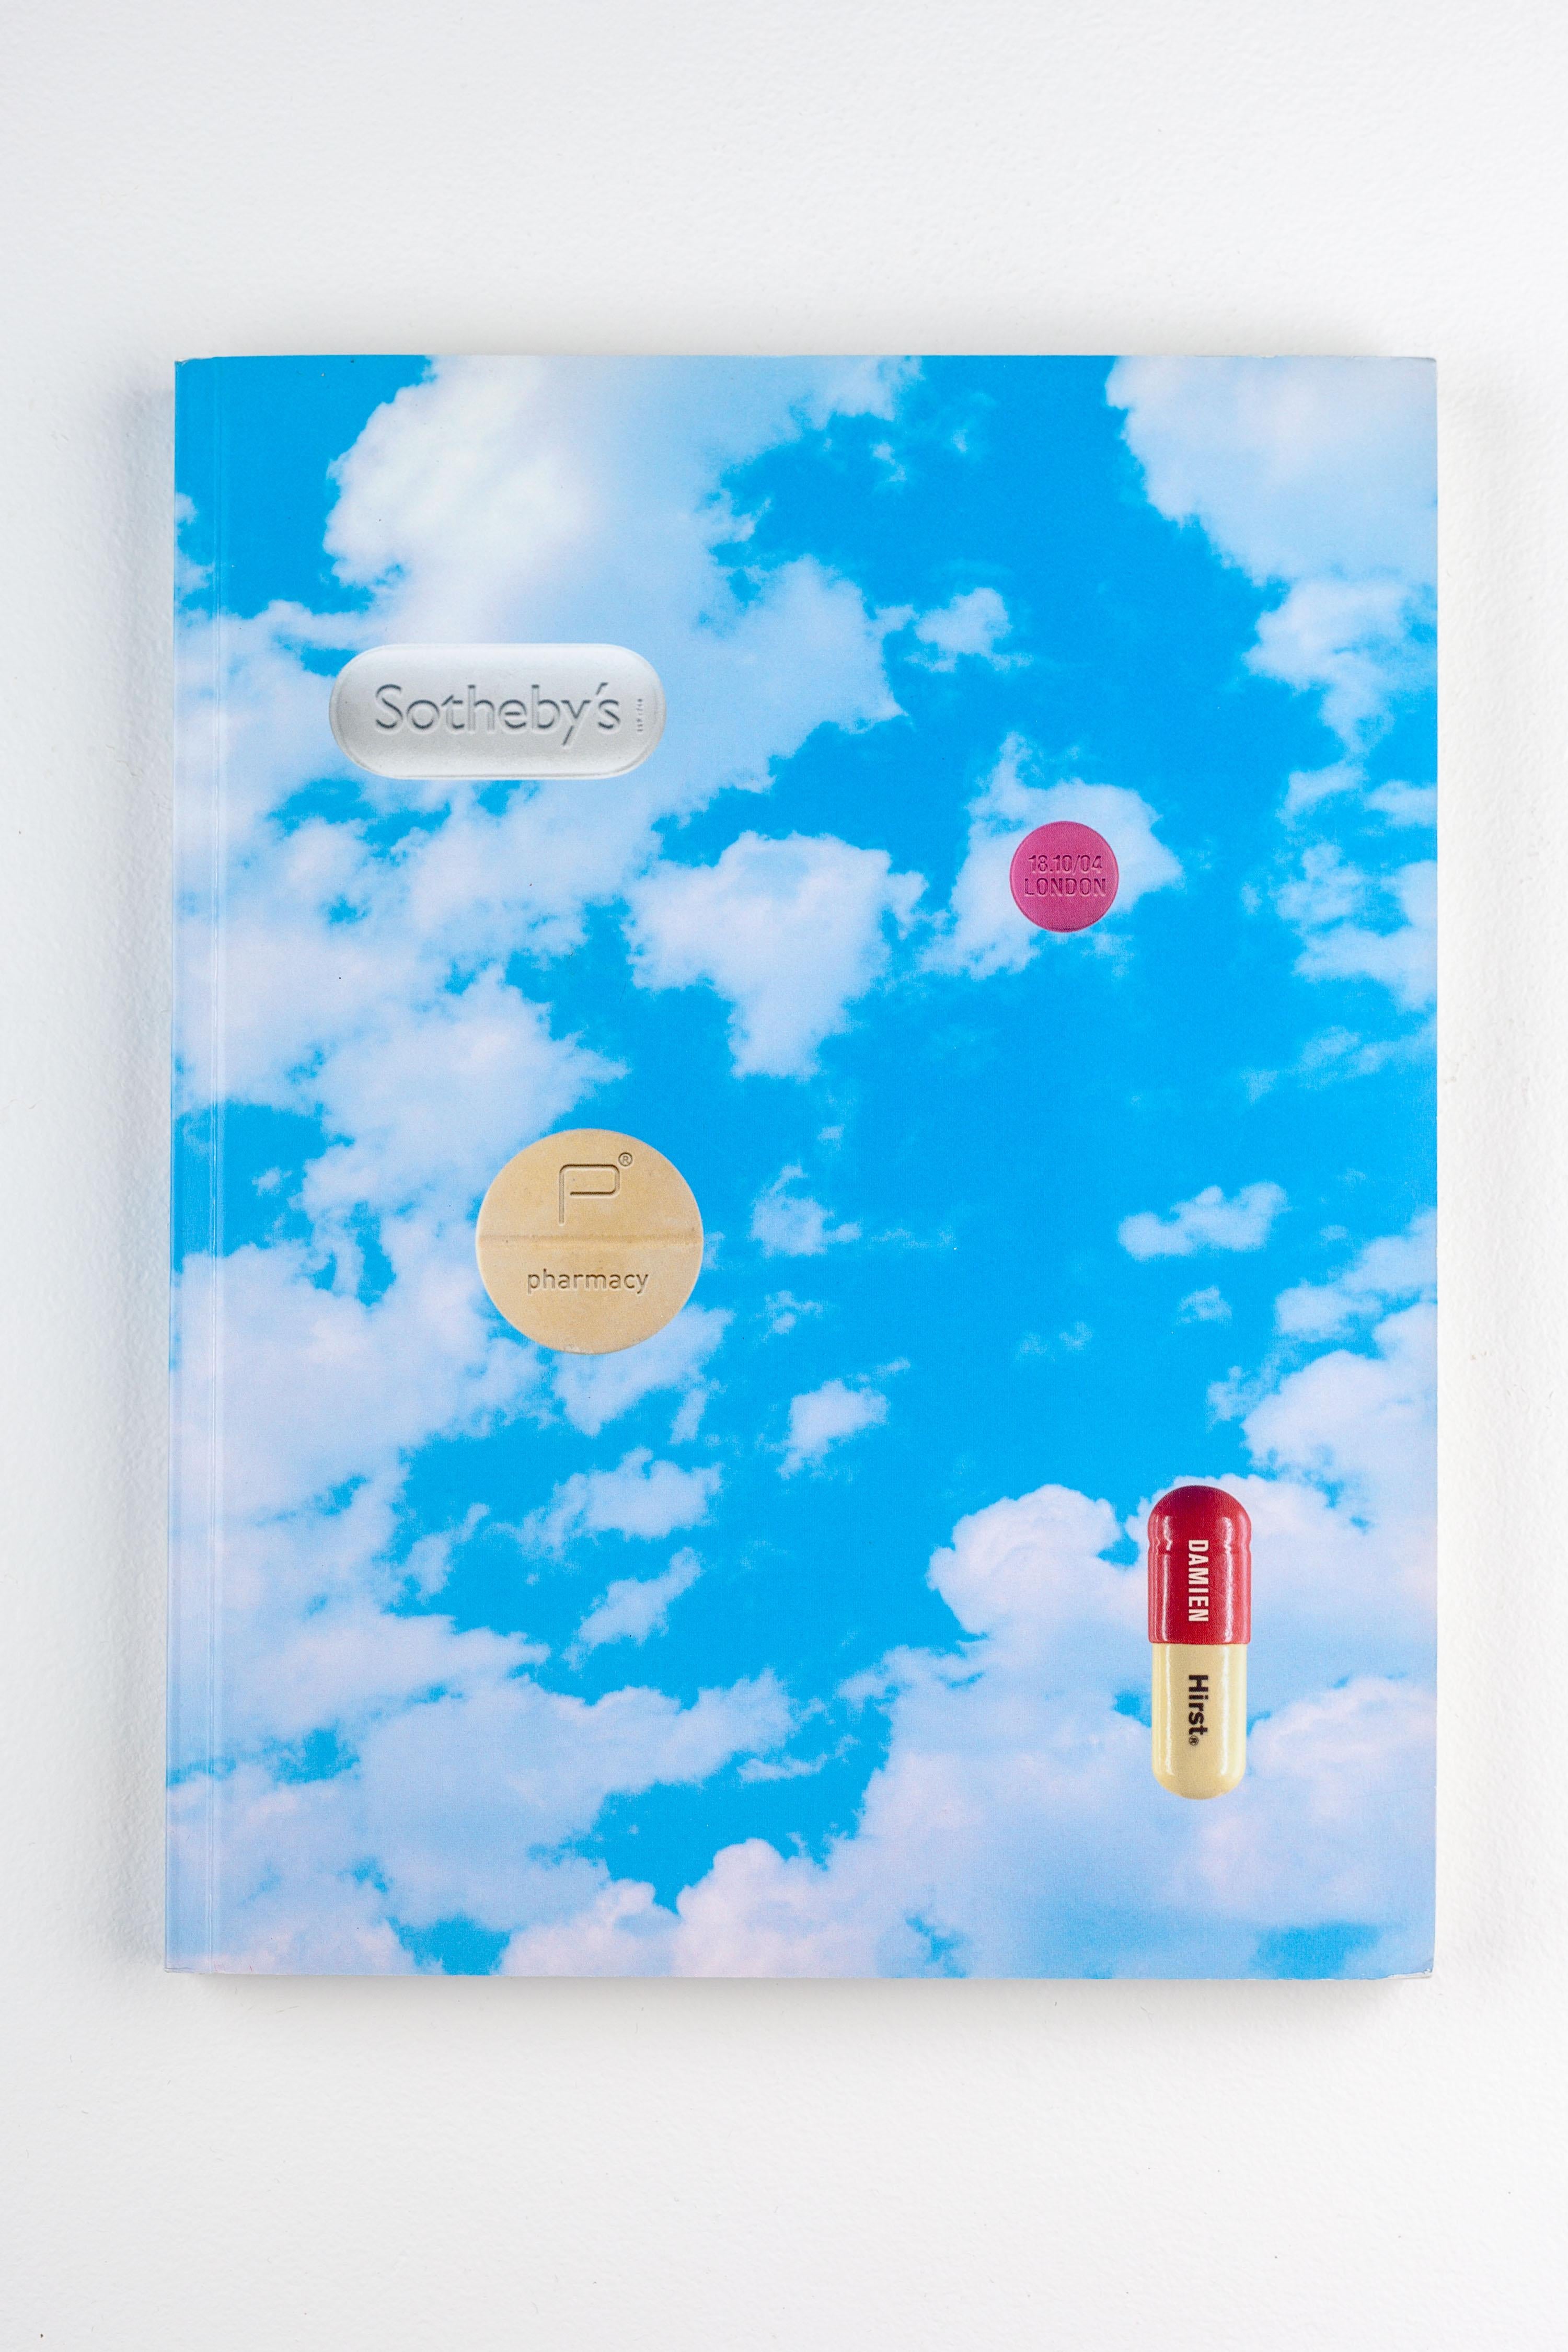 English Damien Hirst Pharmacy Catalog (with stickers and results list), Sotheby's 2004 For Sale